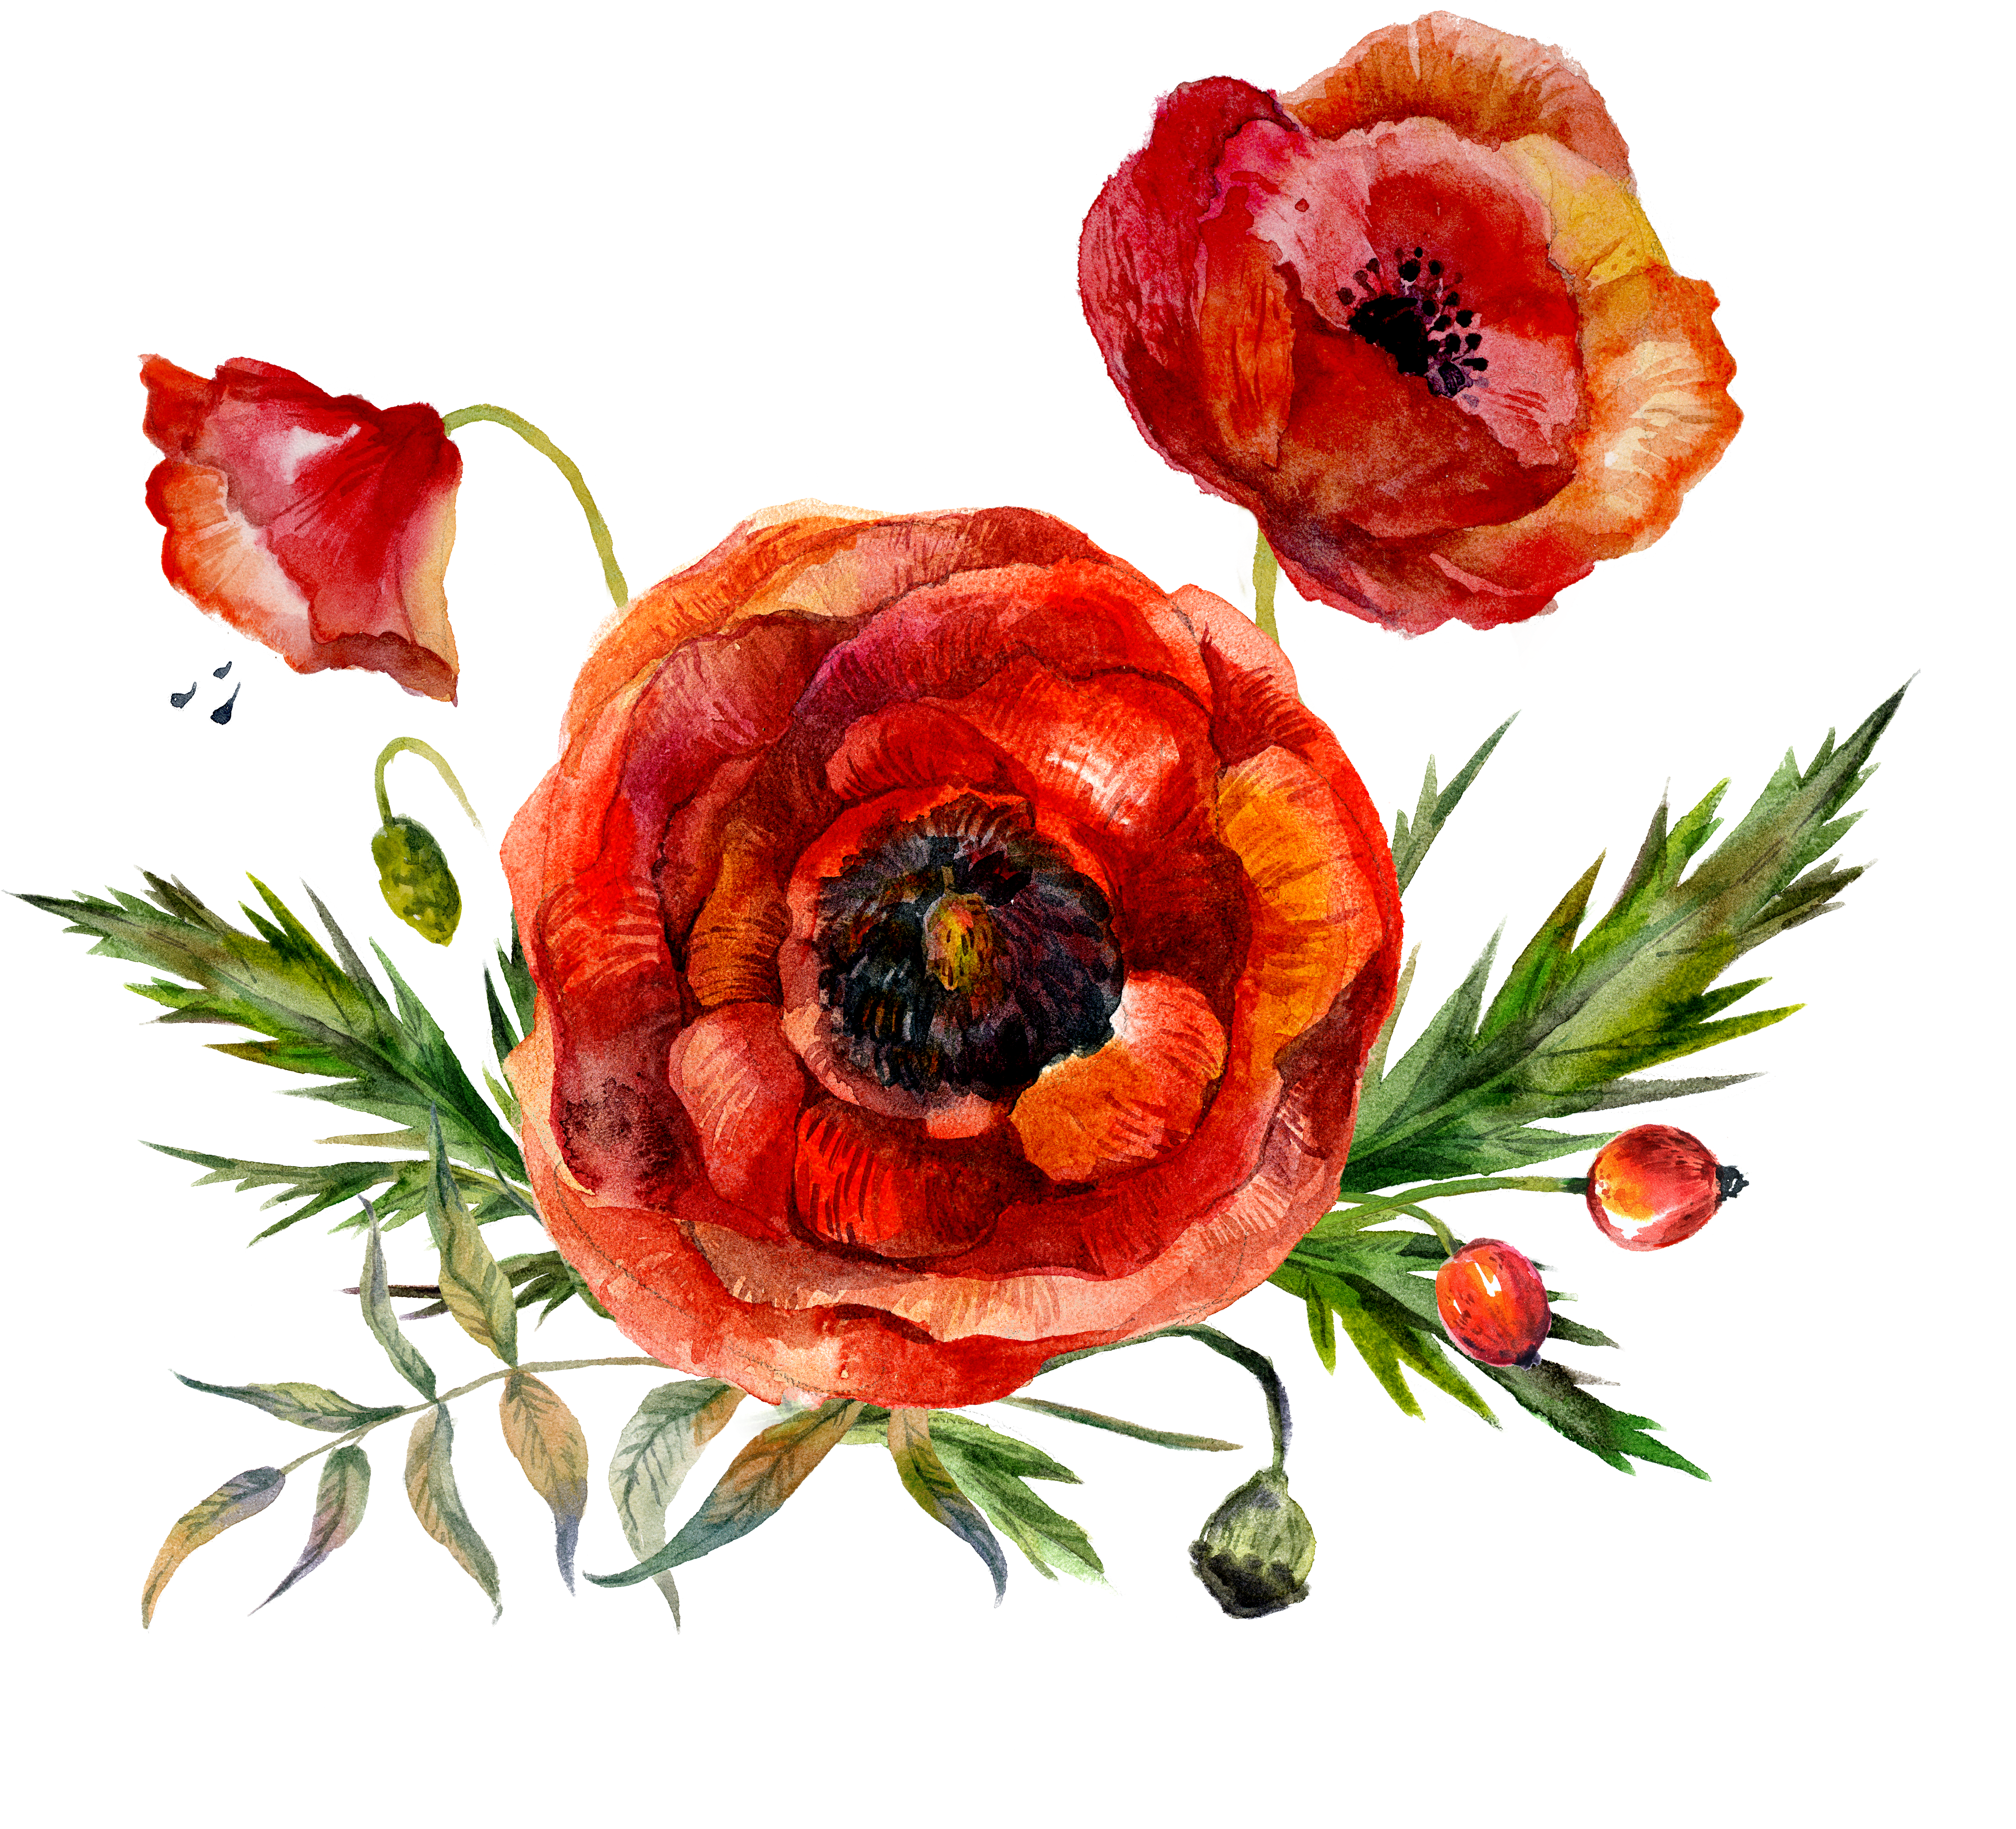 Watercolor Painting Flower Poppy - Watercolor Painting Flower Poppy (5000x5000)